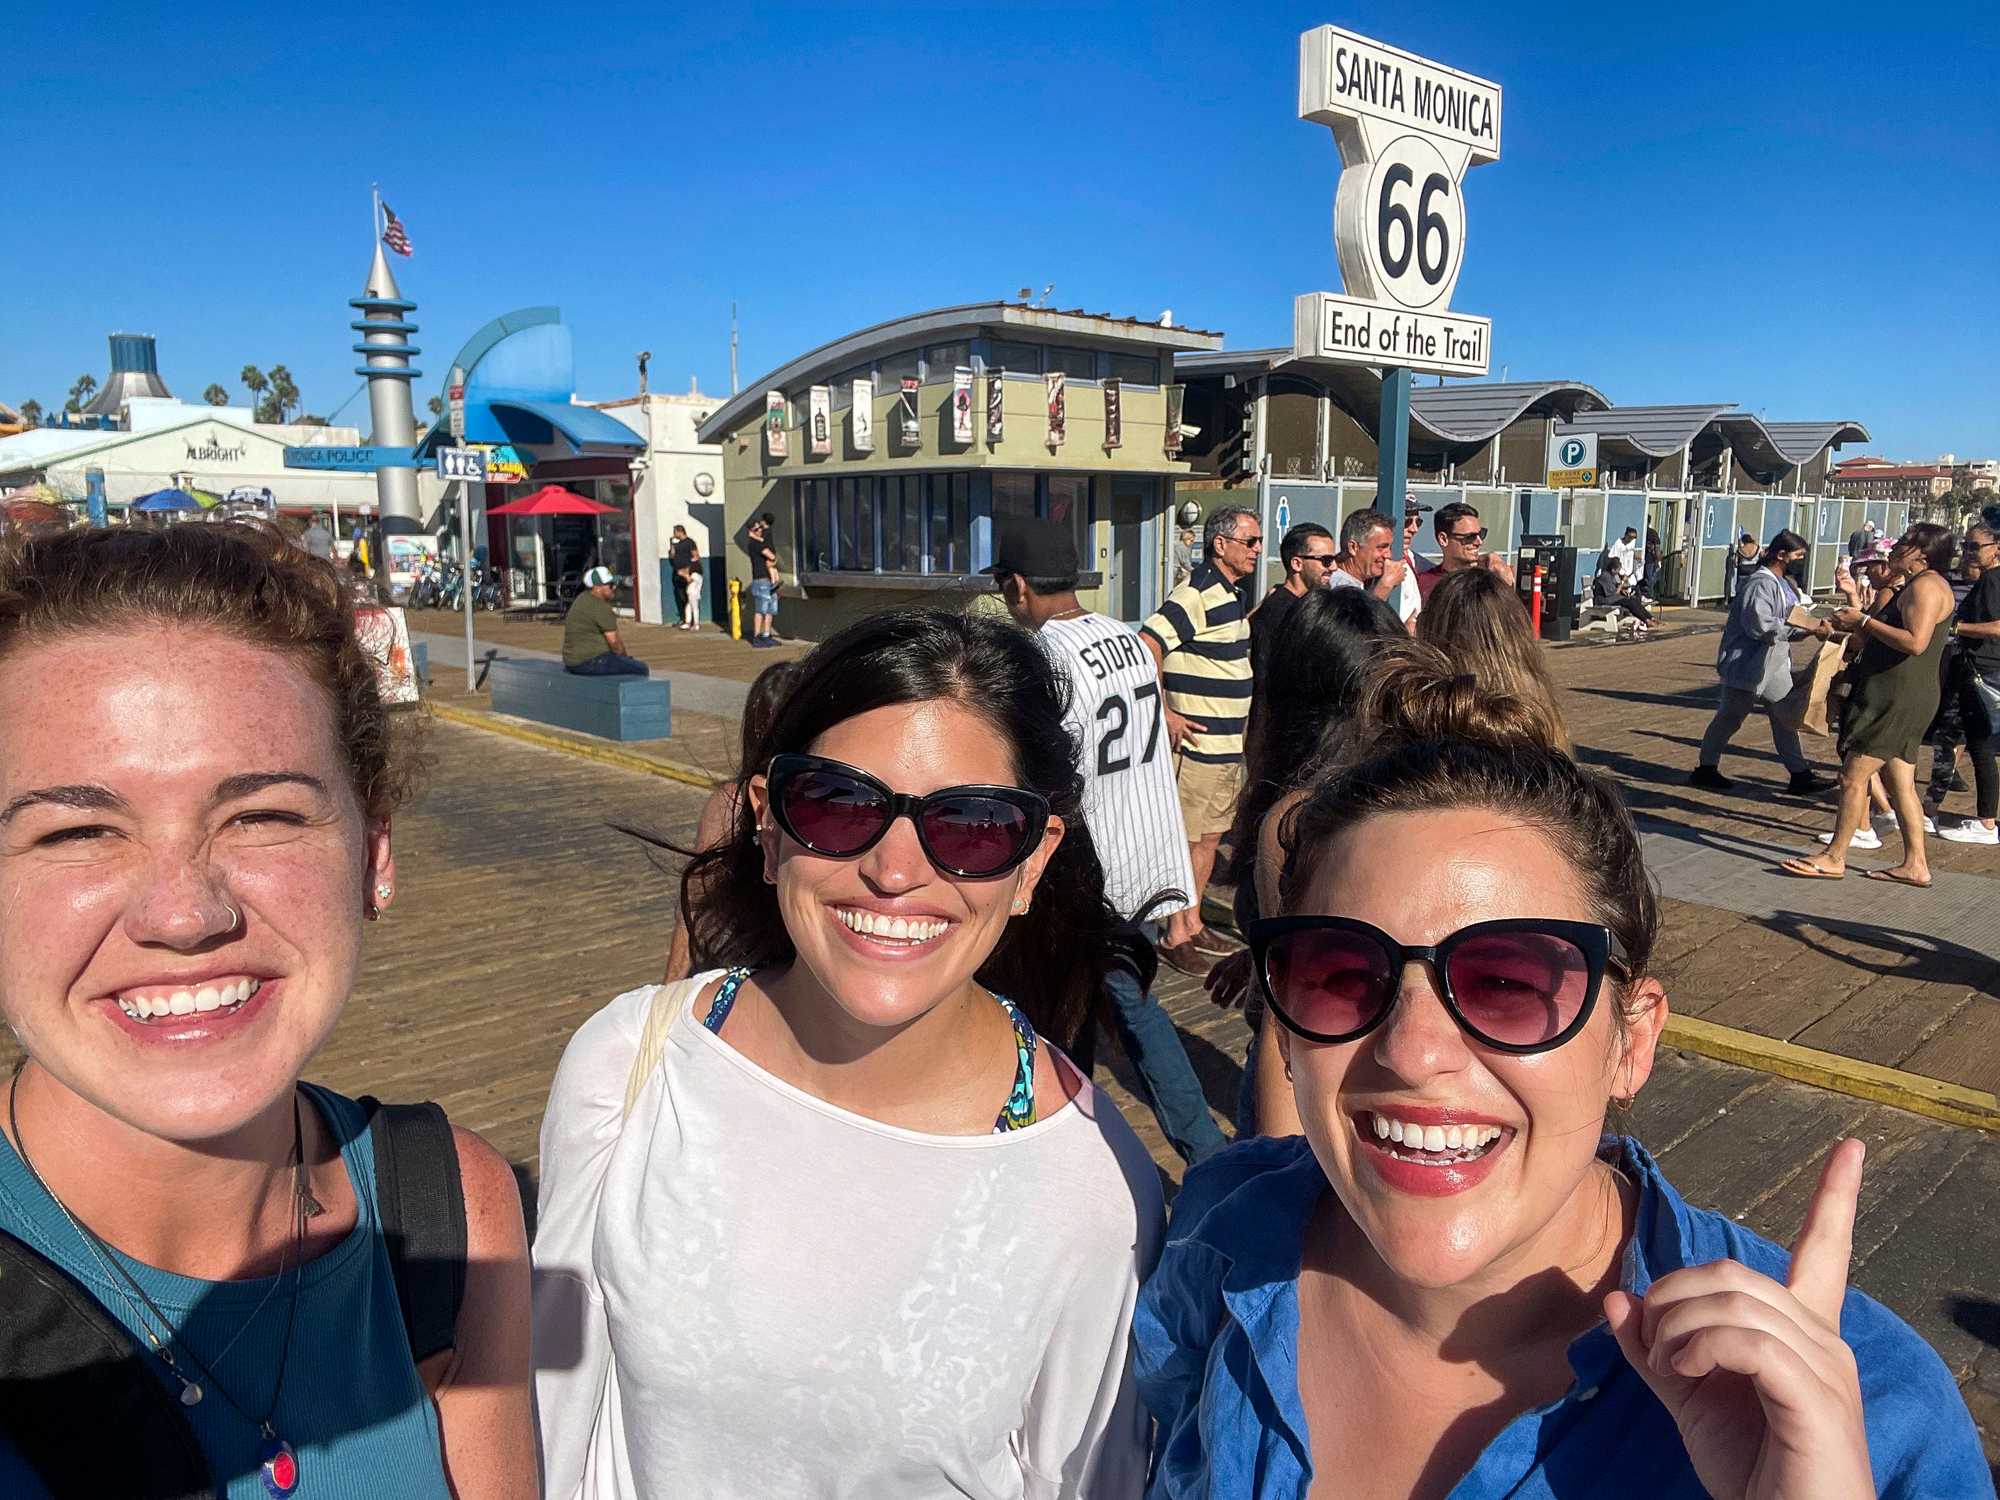 Globe staffers Erin Clark, Lissandra Villa, and Annalisa Quinn took a selfie to mark the end of their journey at the end of Route 66 in Santa Monica, Calif.